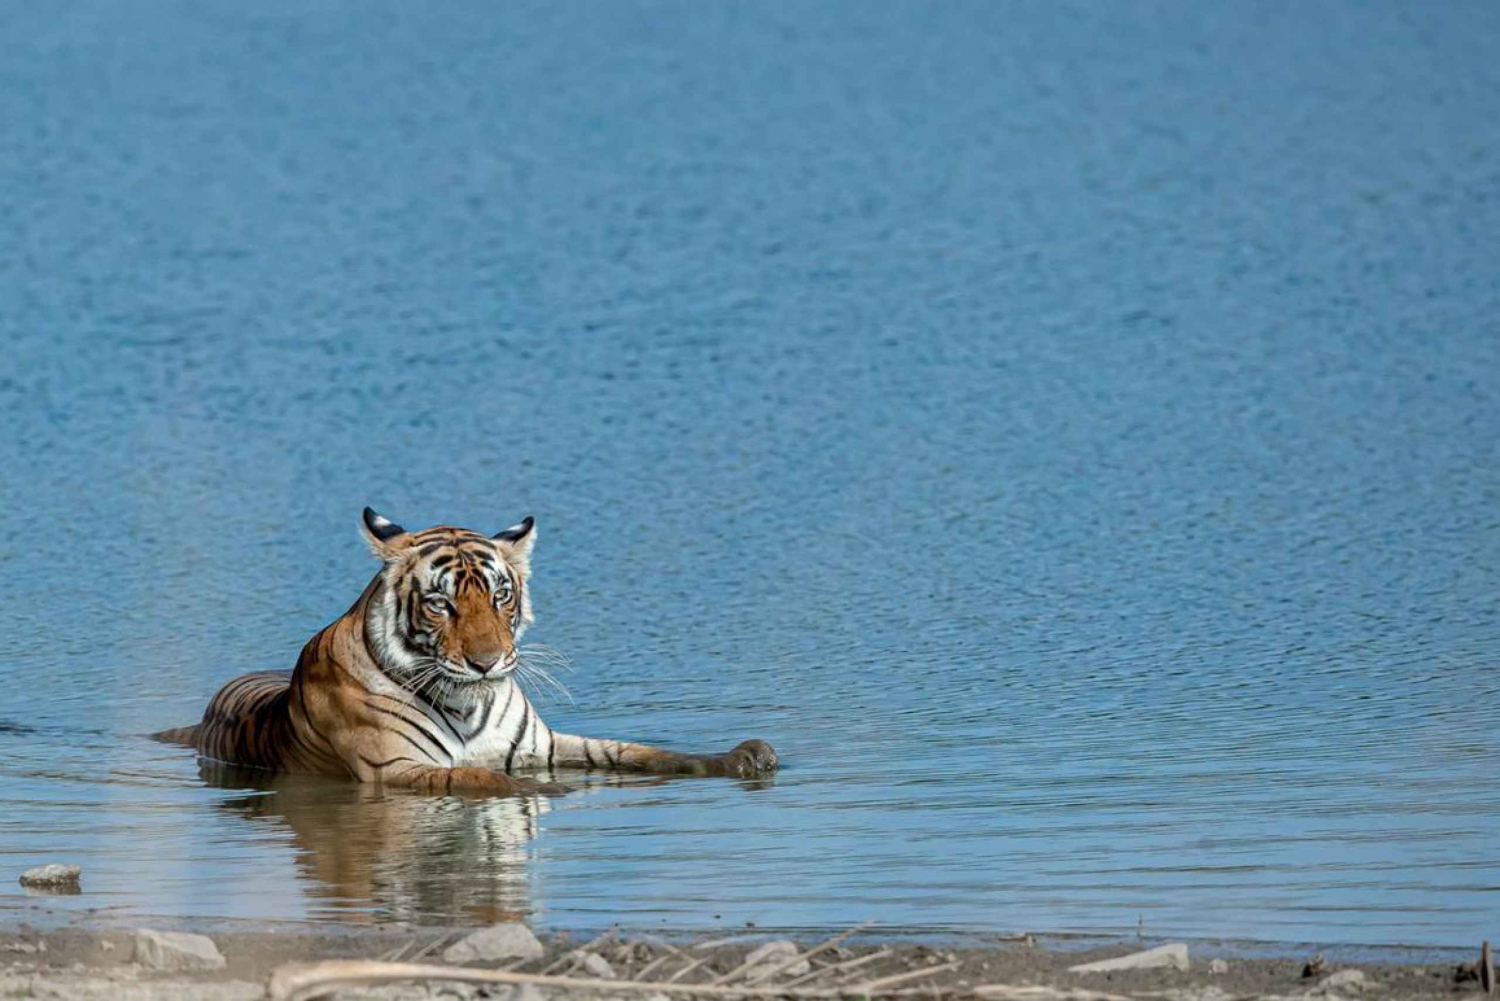 From Jaipur: Day Trip to Ranthambore with Tiger Safari